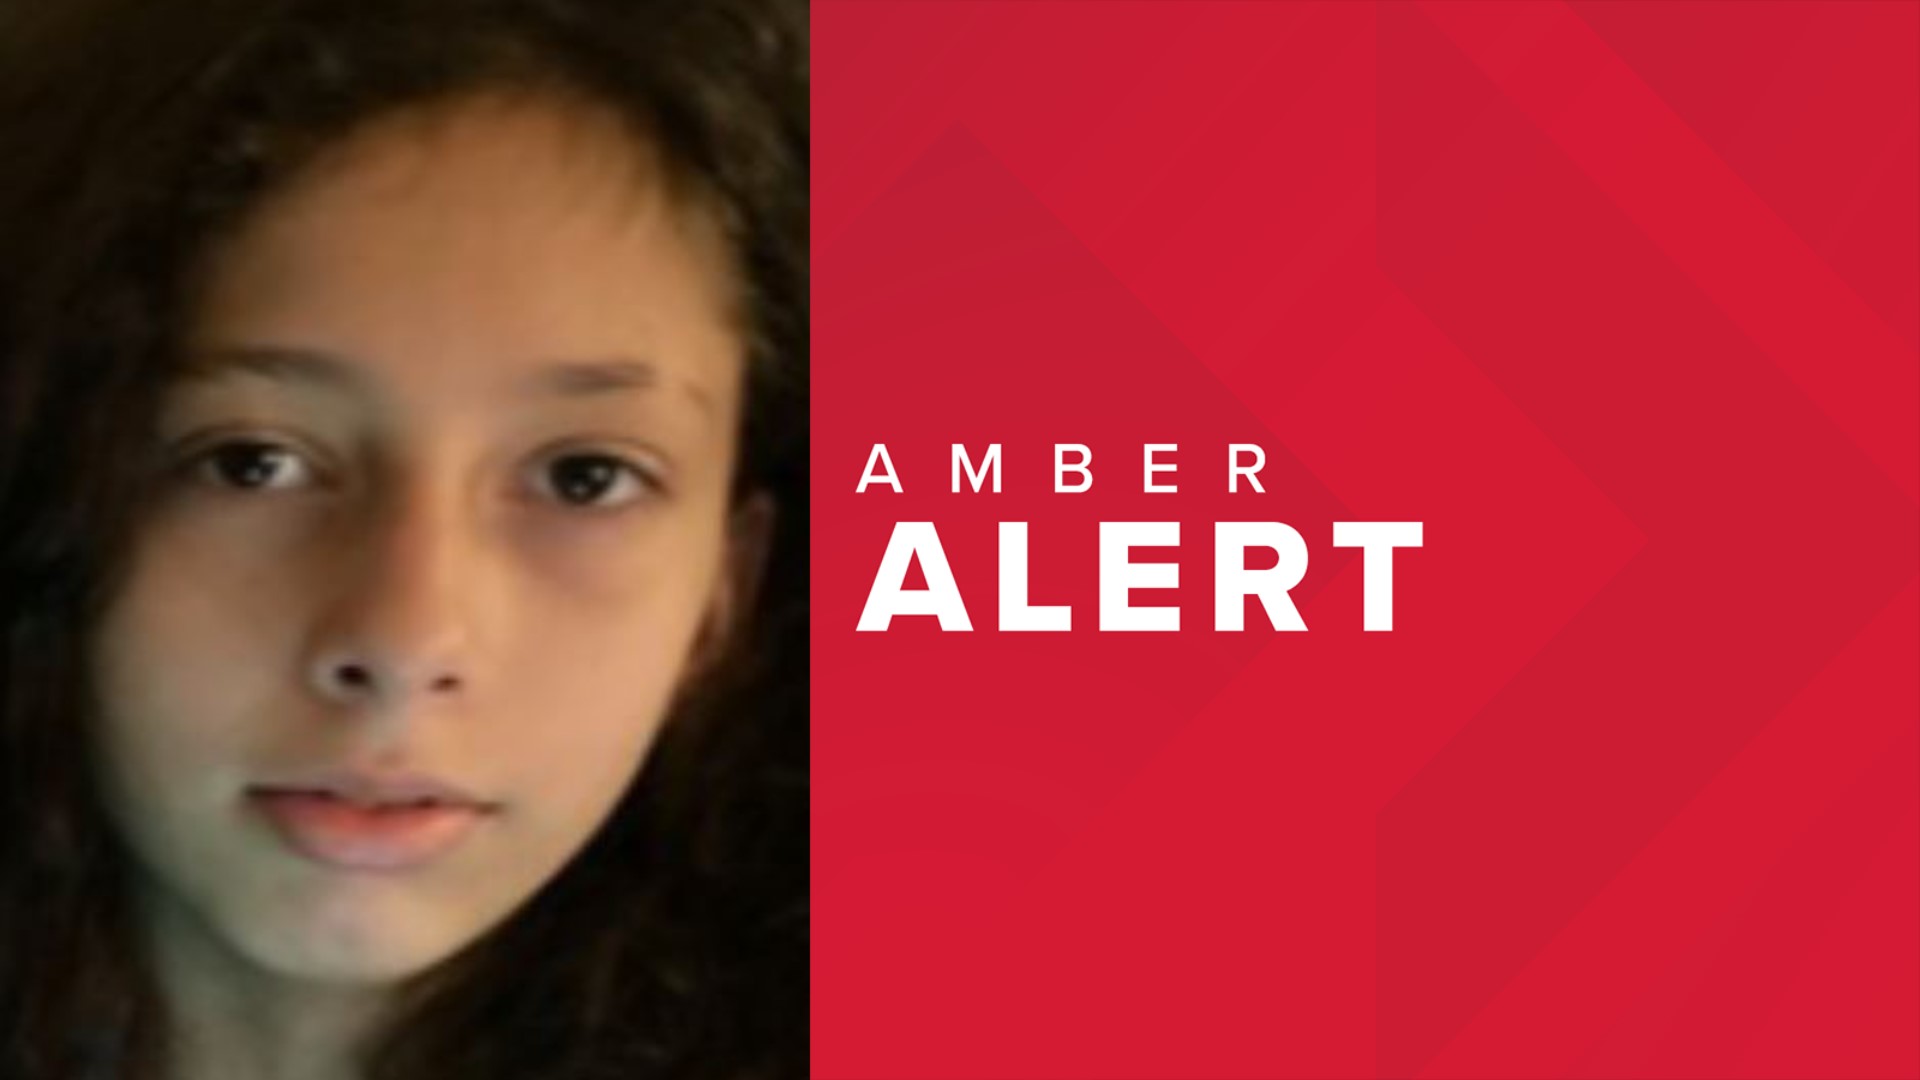 Texas authorities believe the girl was taken by a family member.